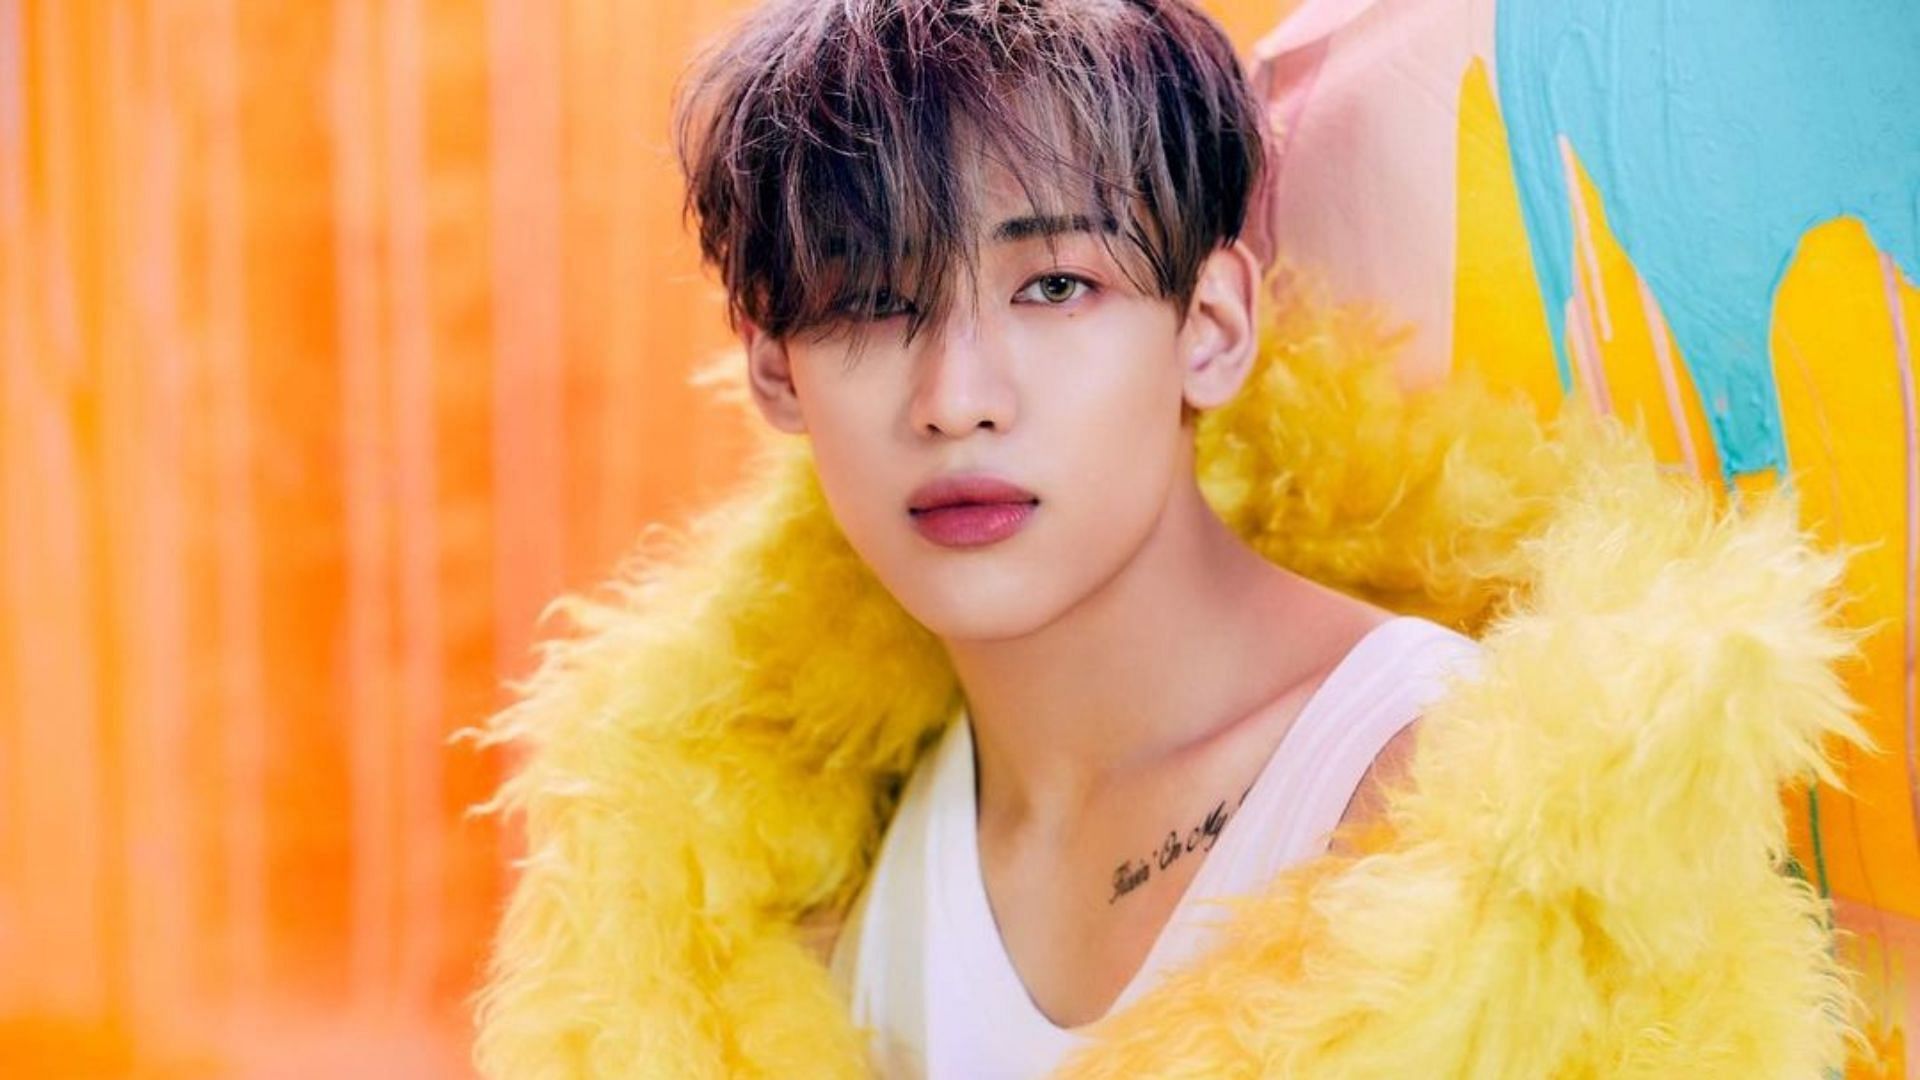 BamBam shares his honest thoughts during the time GOT7 left JYP Entertainment (Image via Instagram/bambam1a)